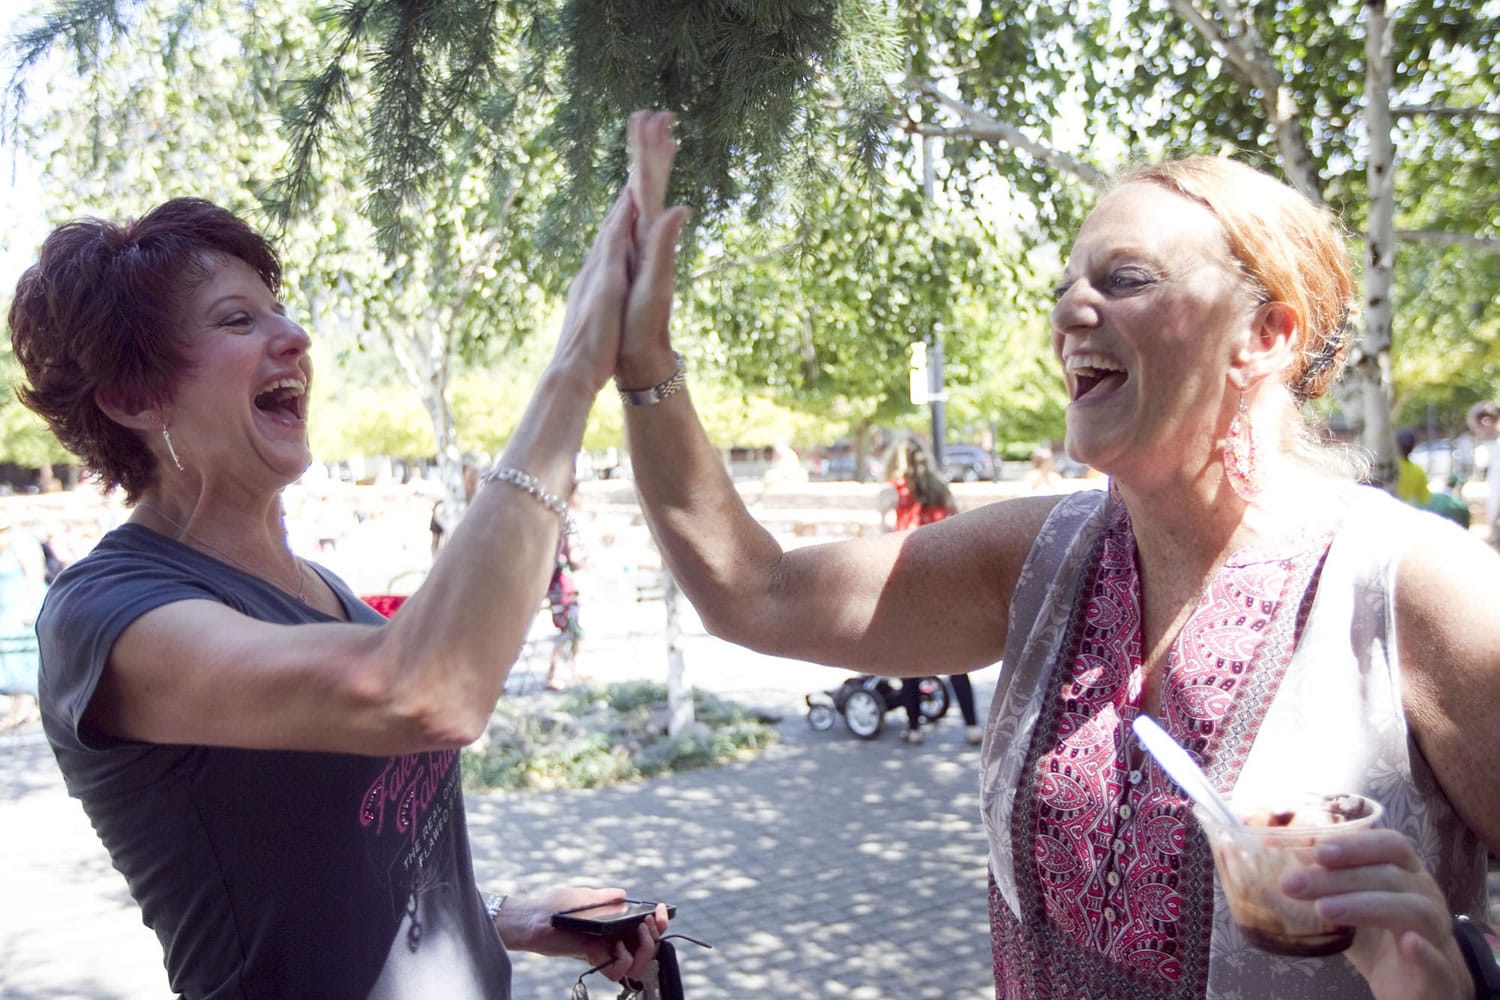 Susan Pagel of Battle Ground, left, high-fives fellow breast cancer survivor Becky Ewer at a social event sponsored by the nonprofit Pink Lemonade Project this summer in Jamison Square in Portland.